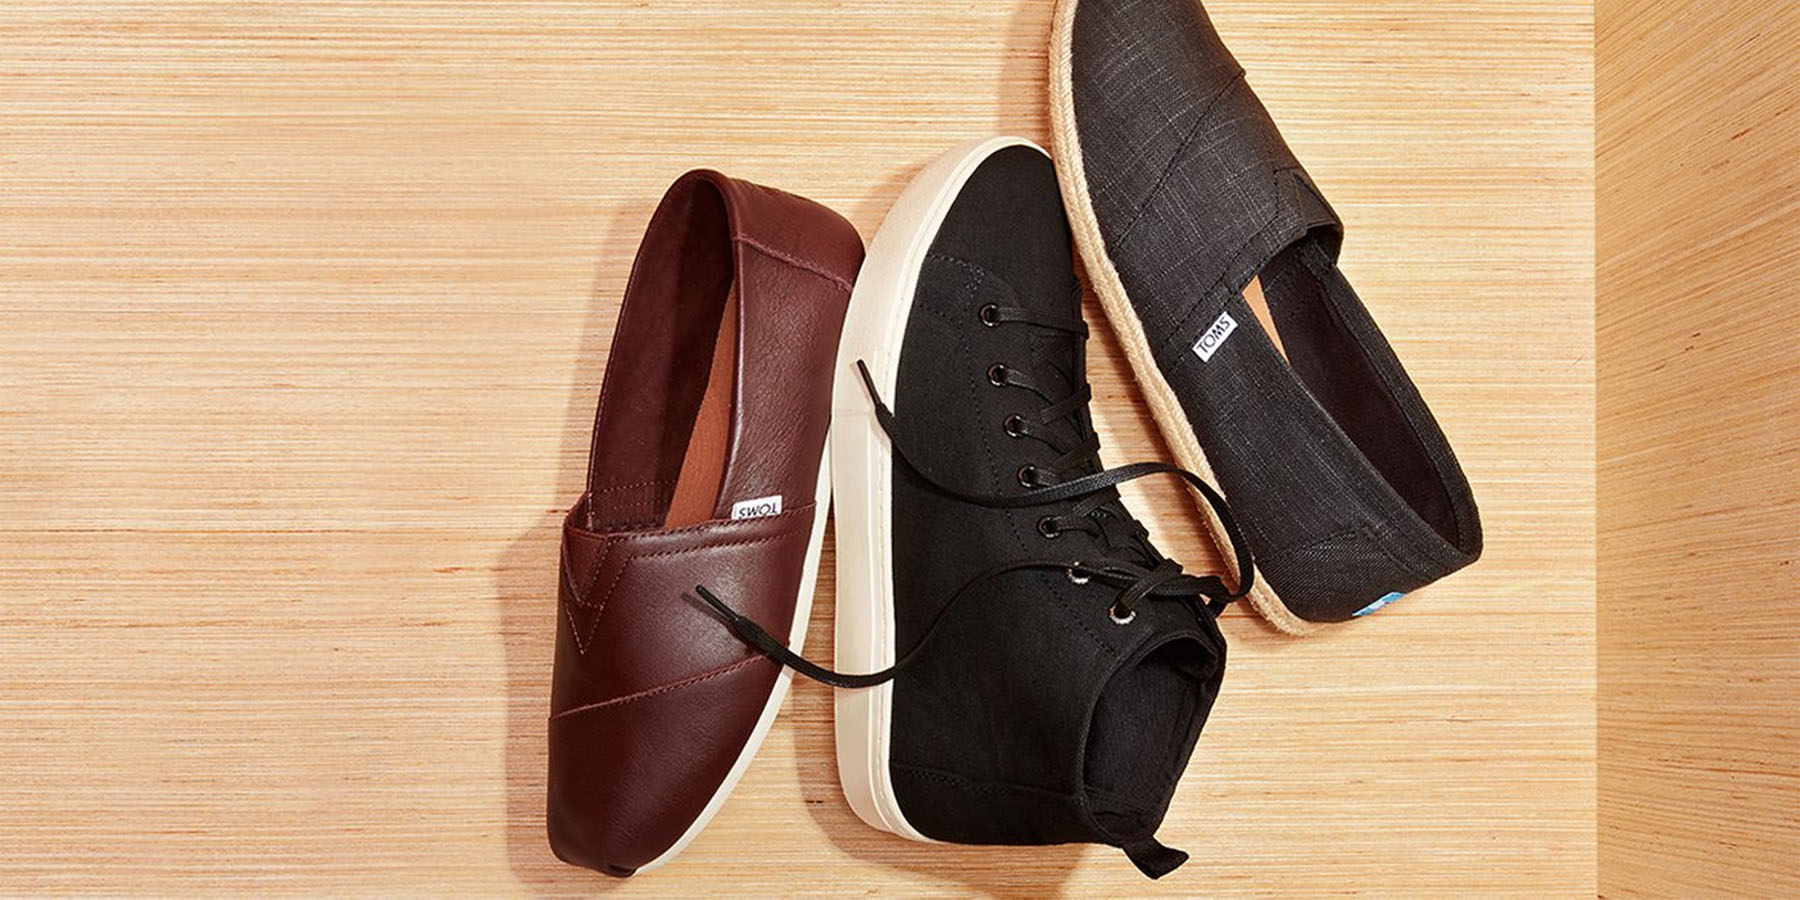 TOMS shoes for men and women from just 